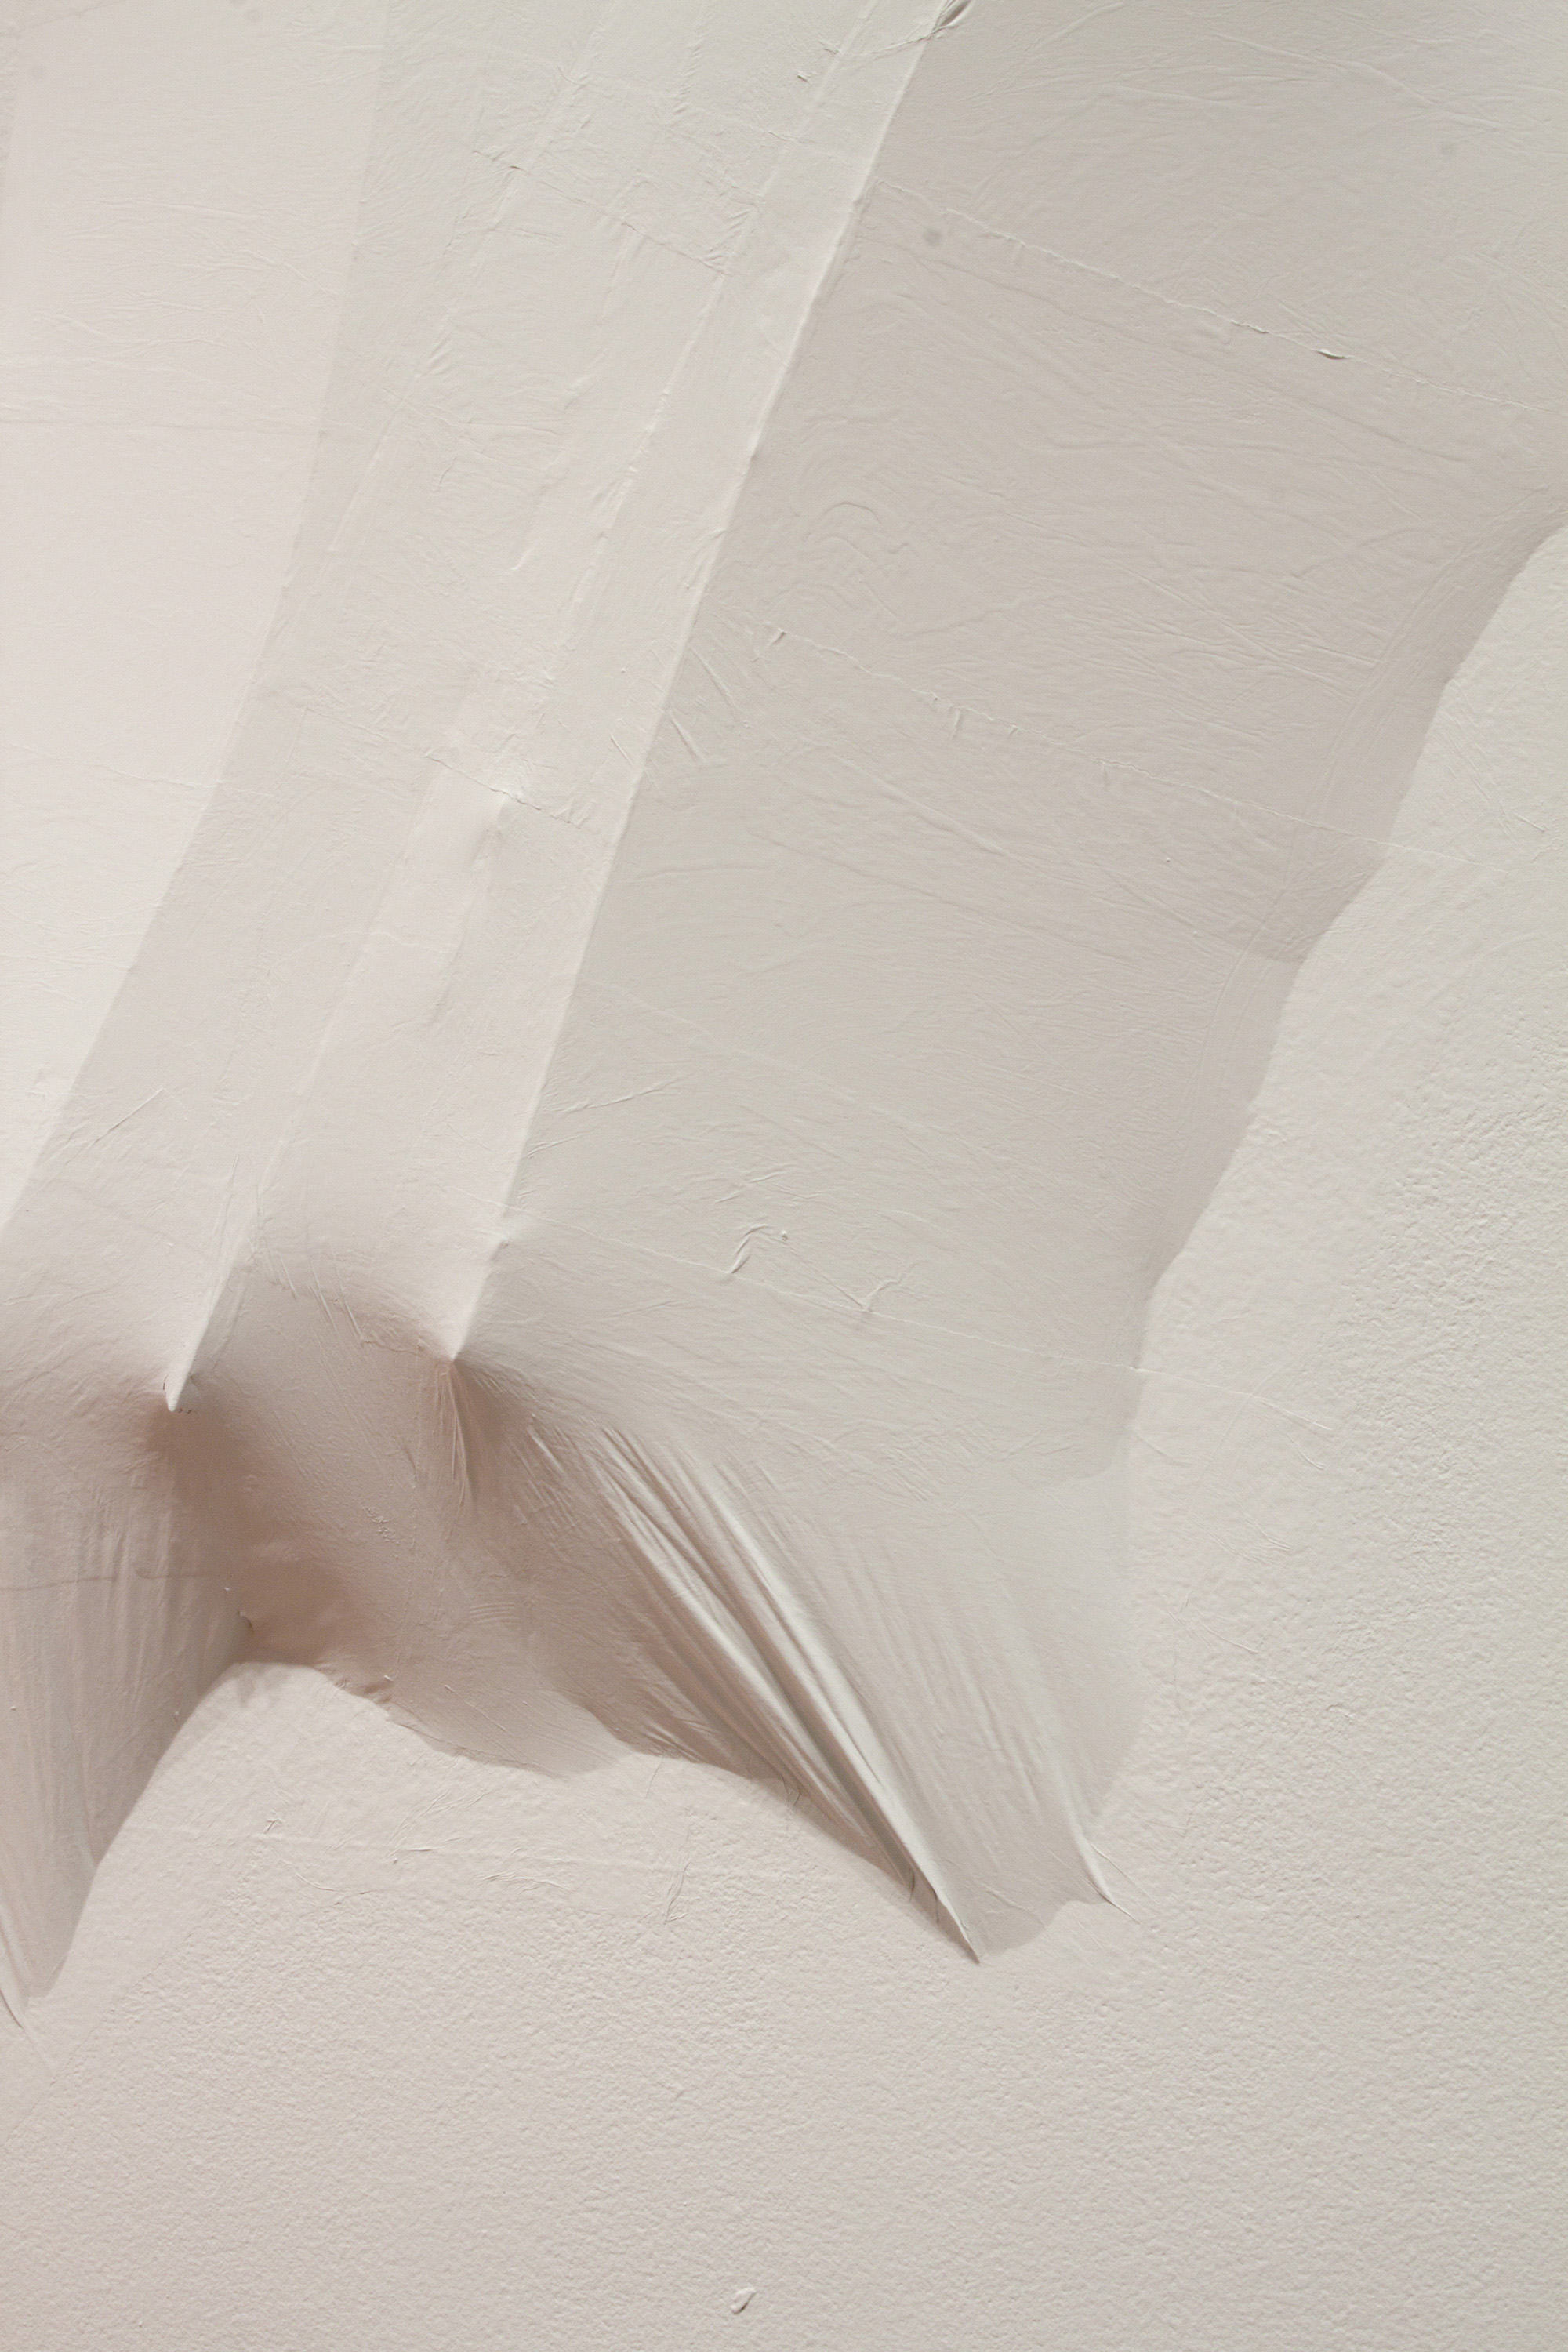  Detail  Untitled (white forms)   2011   Wood strips, tracing paper, latex paint  Approx. 144 x 216 x 3 in.&nbsp;    